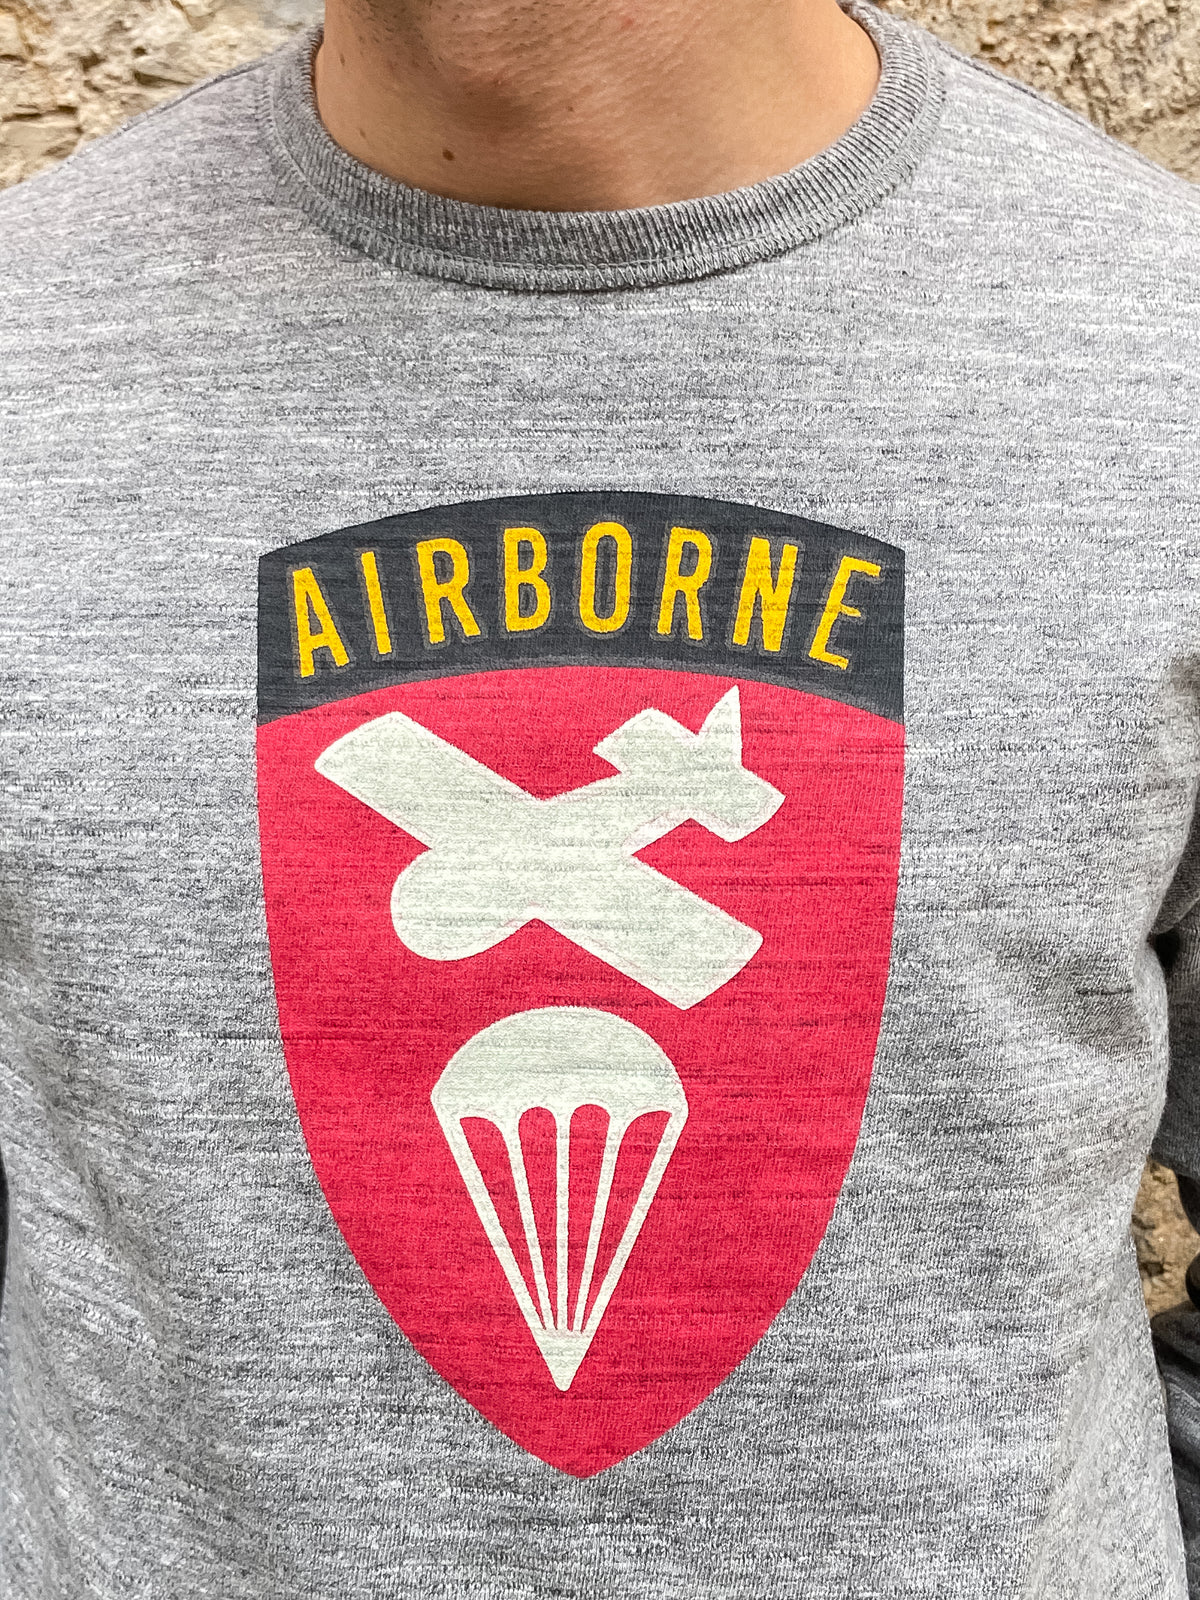 The Real McCoy's MC21119 Athletic L/S Tee / Airborne Grey